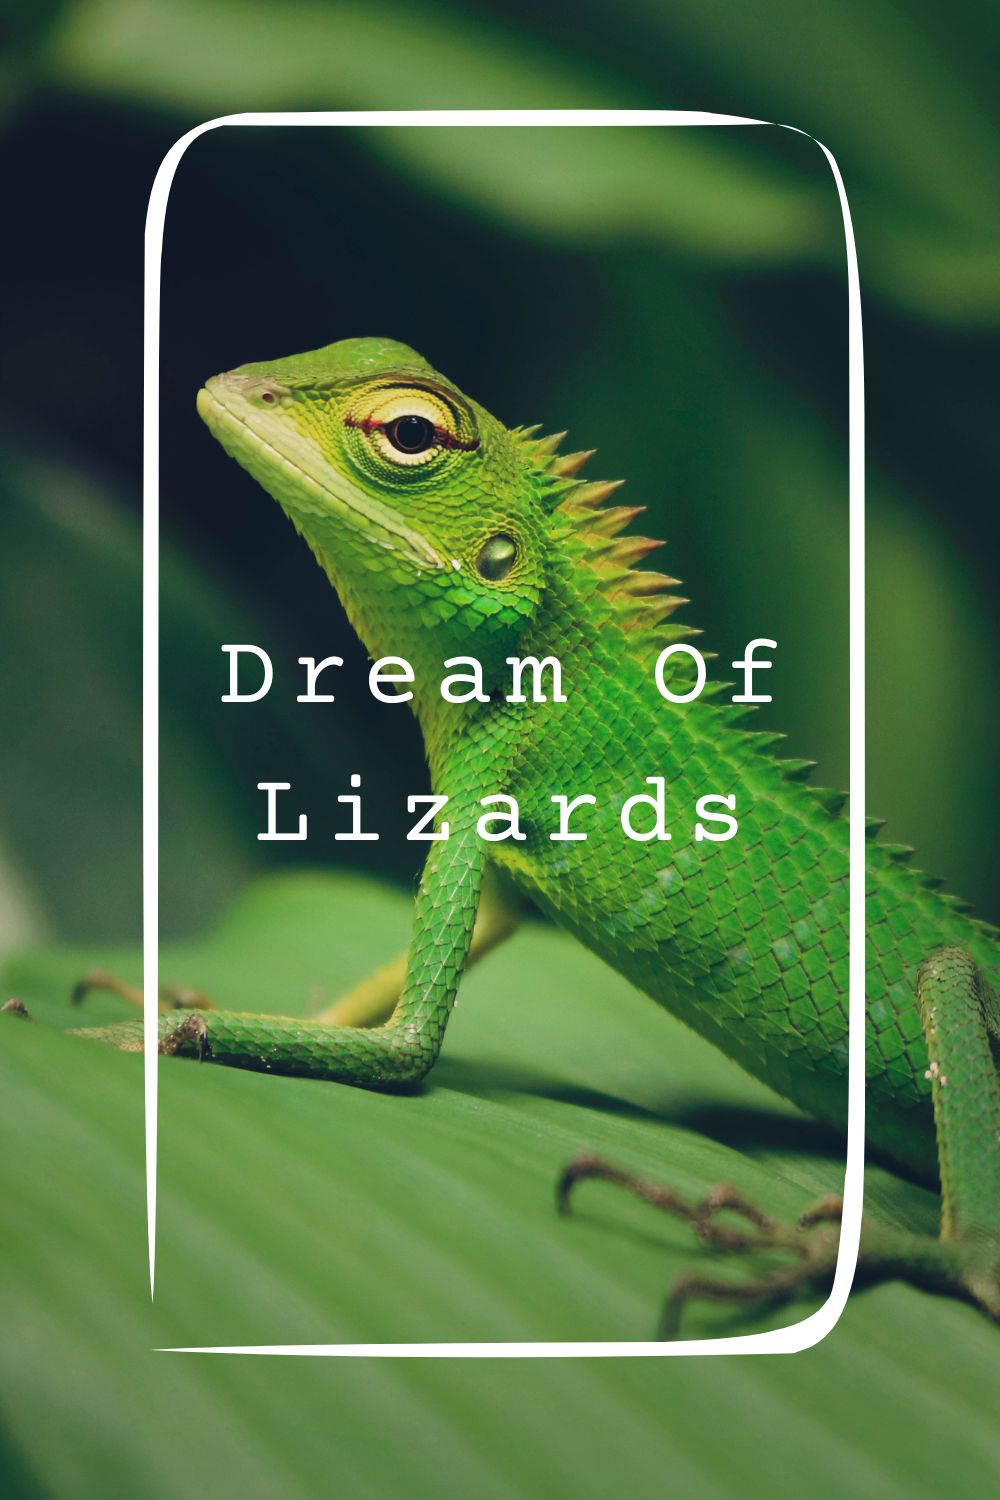 Dream Of Lizards Meanings 1